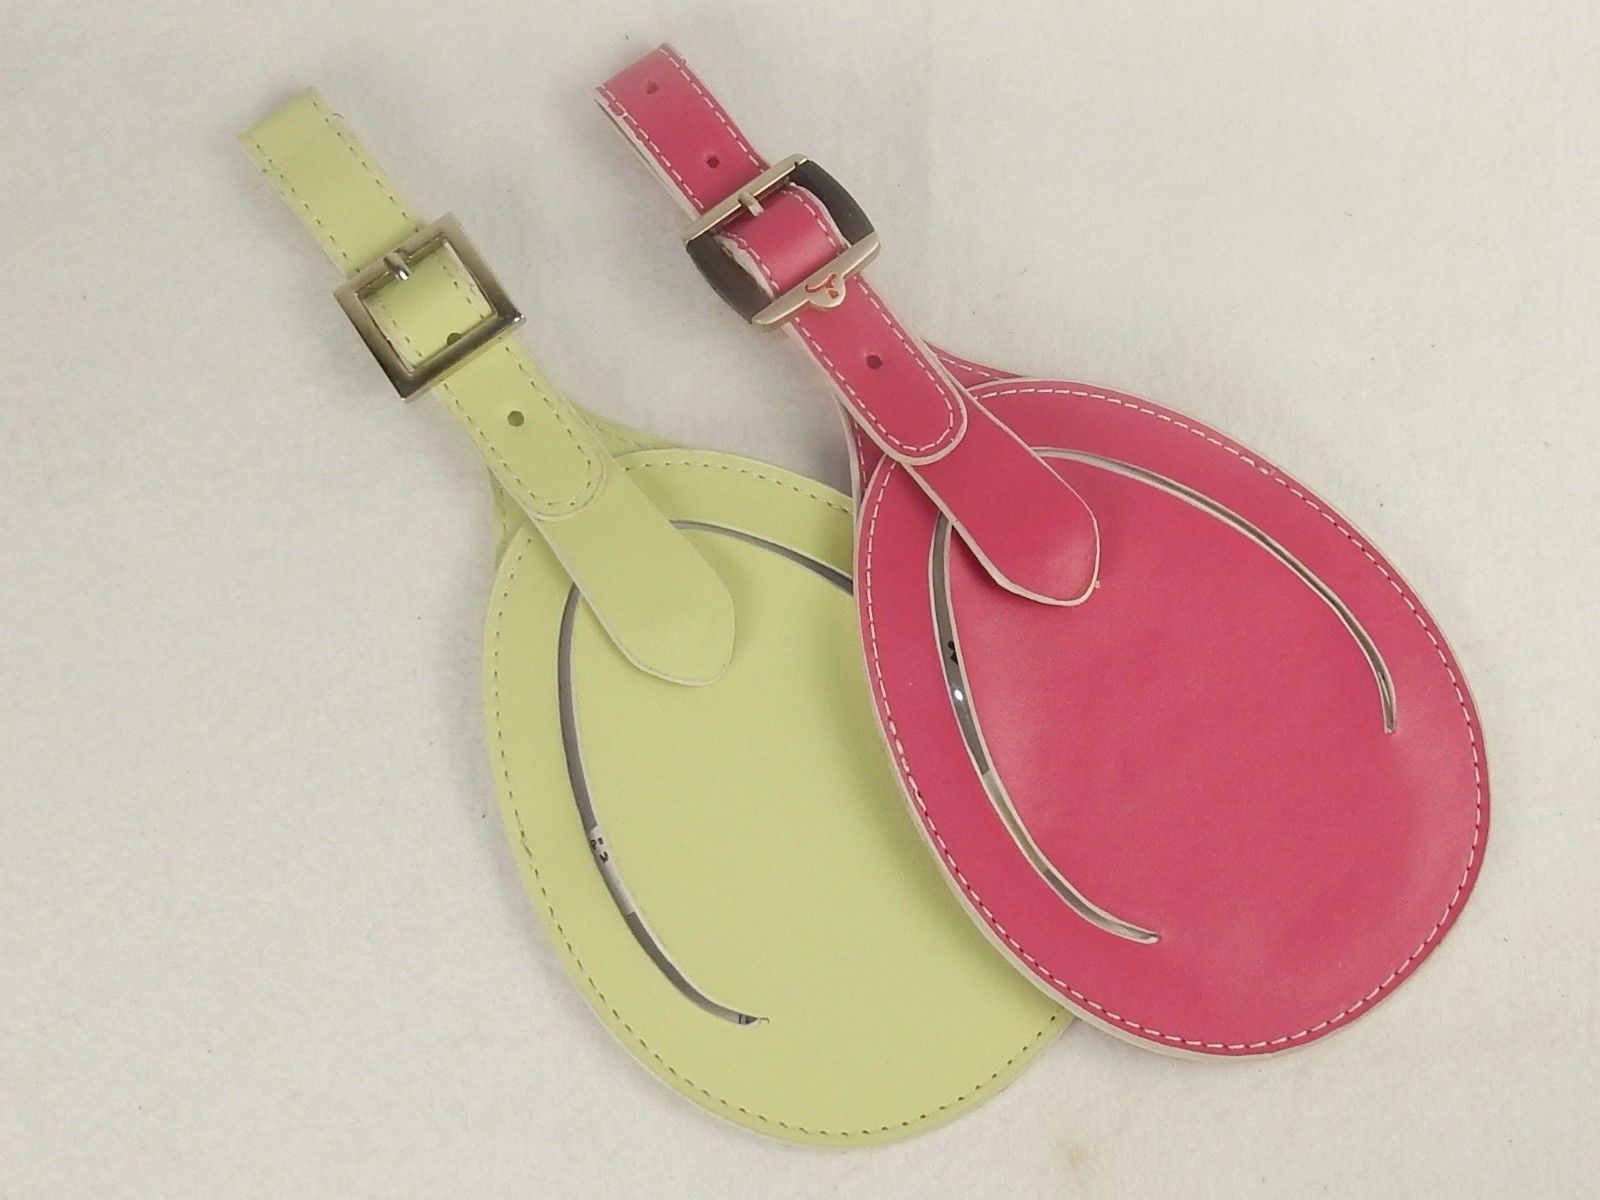 Leather Luggage Tag ~ Metal Buckle & Snap, Breast Cancer Awareness Pink or Green - $6.81 - $6.82